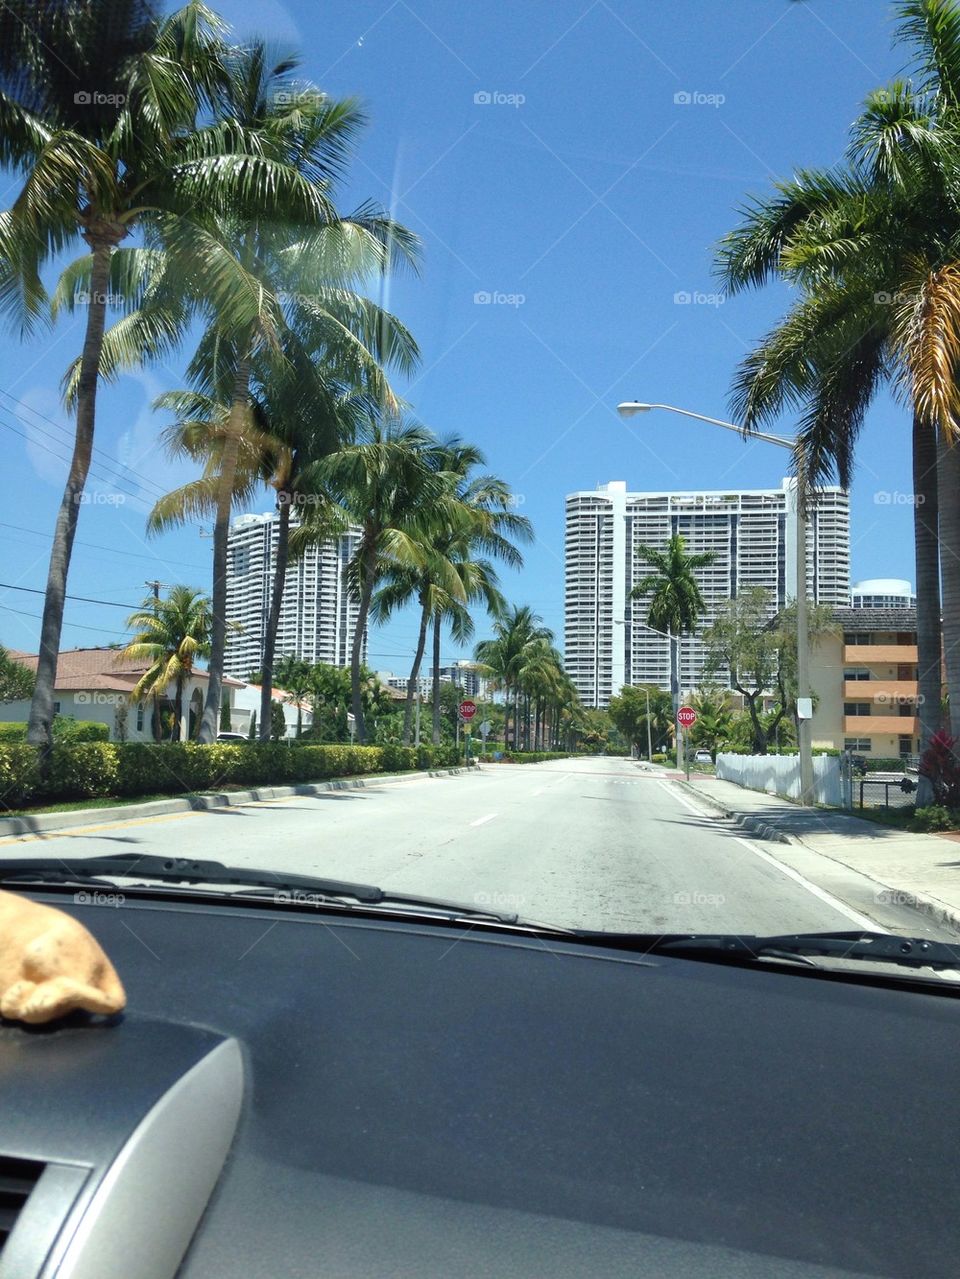 Driving through the awesome palms